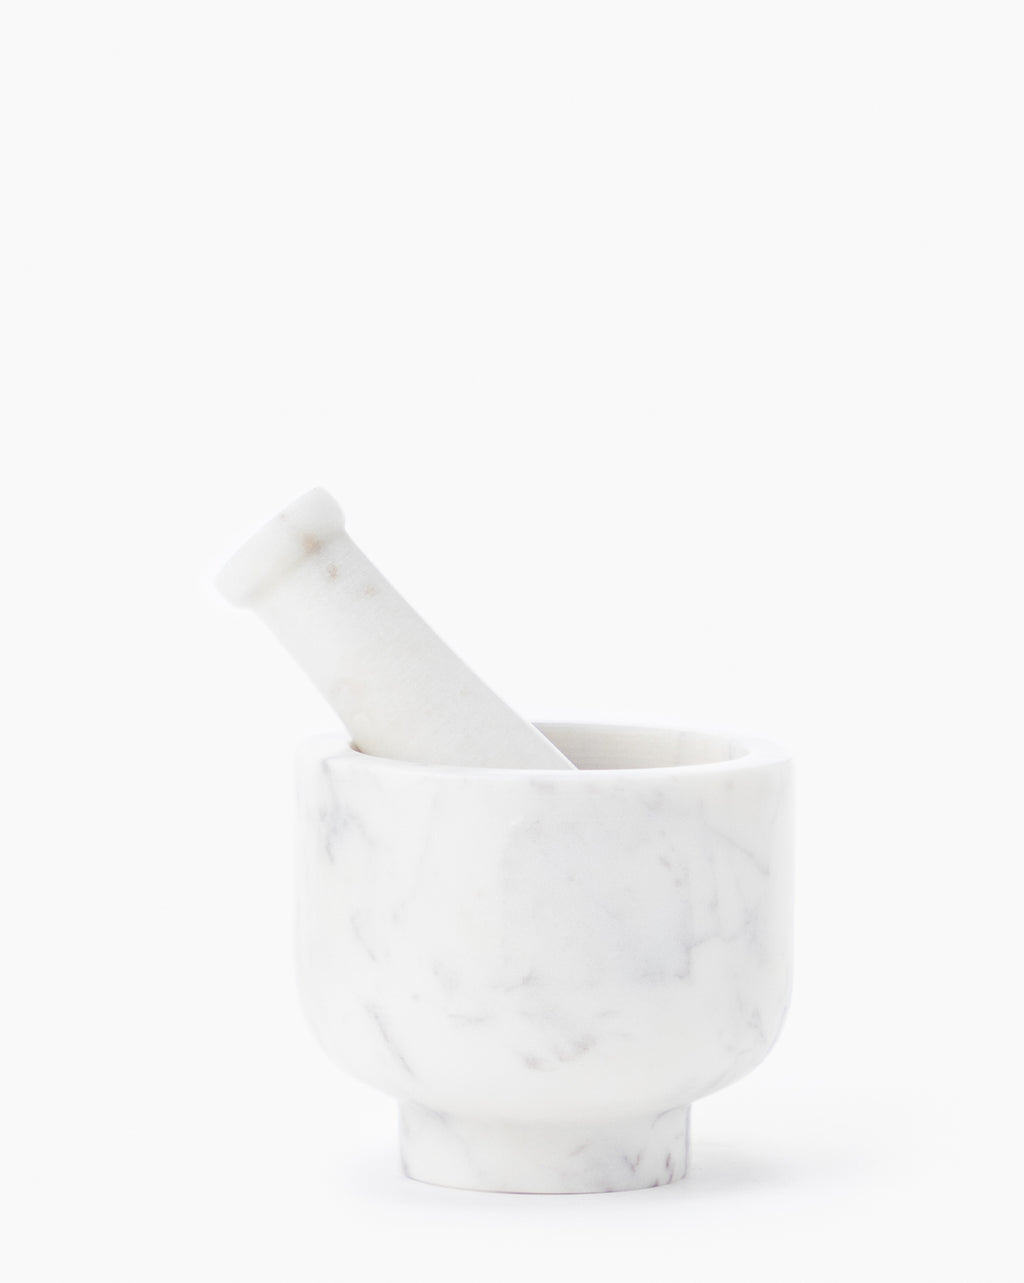 6 White Marble Mortar and Pestle Set